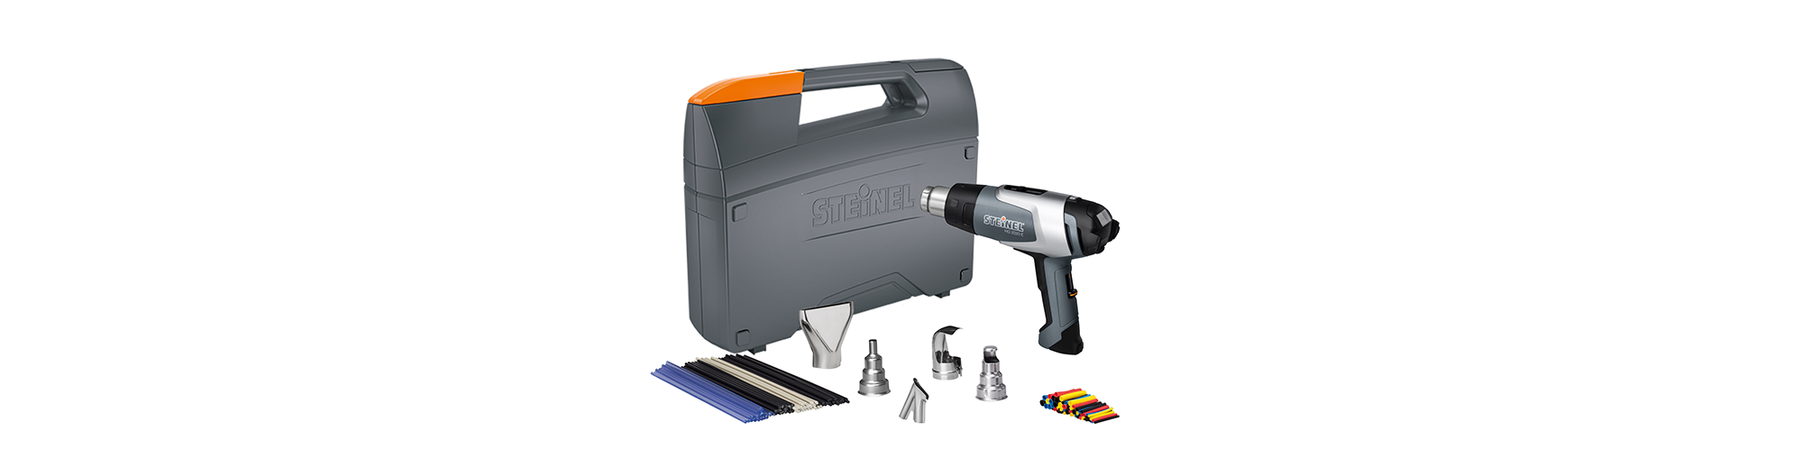 Which Steinel Heat Gun is Right for You?